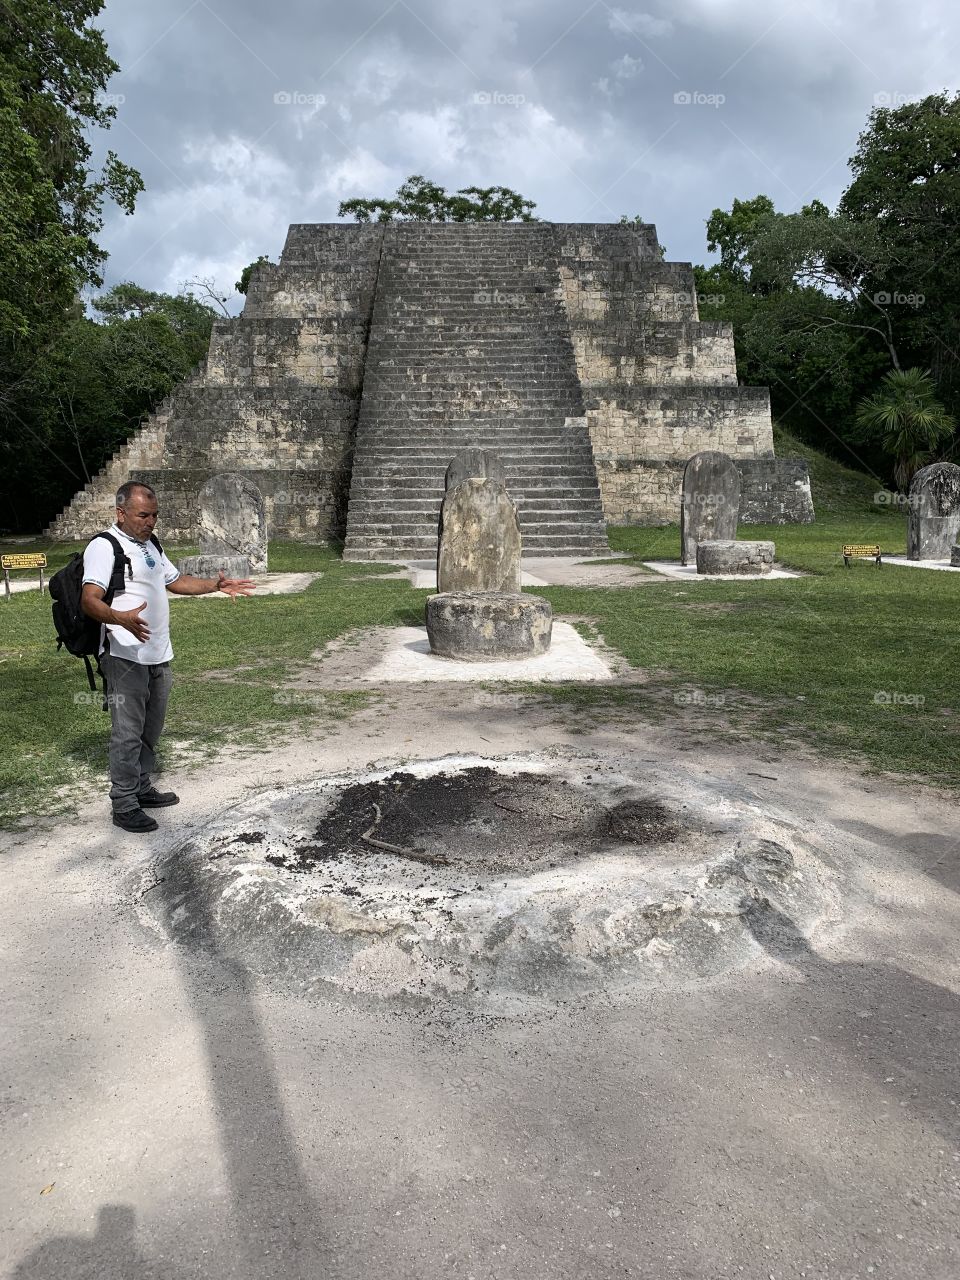 Tikal ruins getting a tour from expertise guide